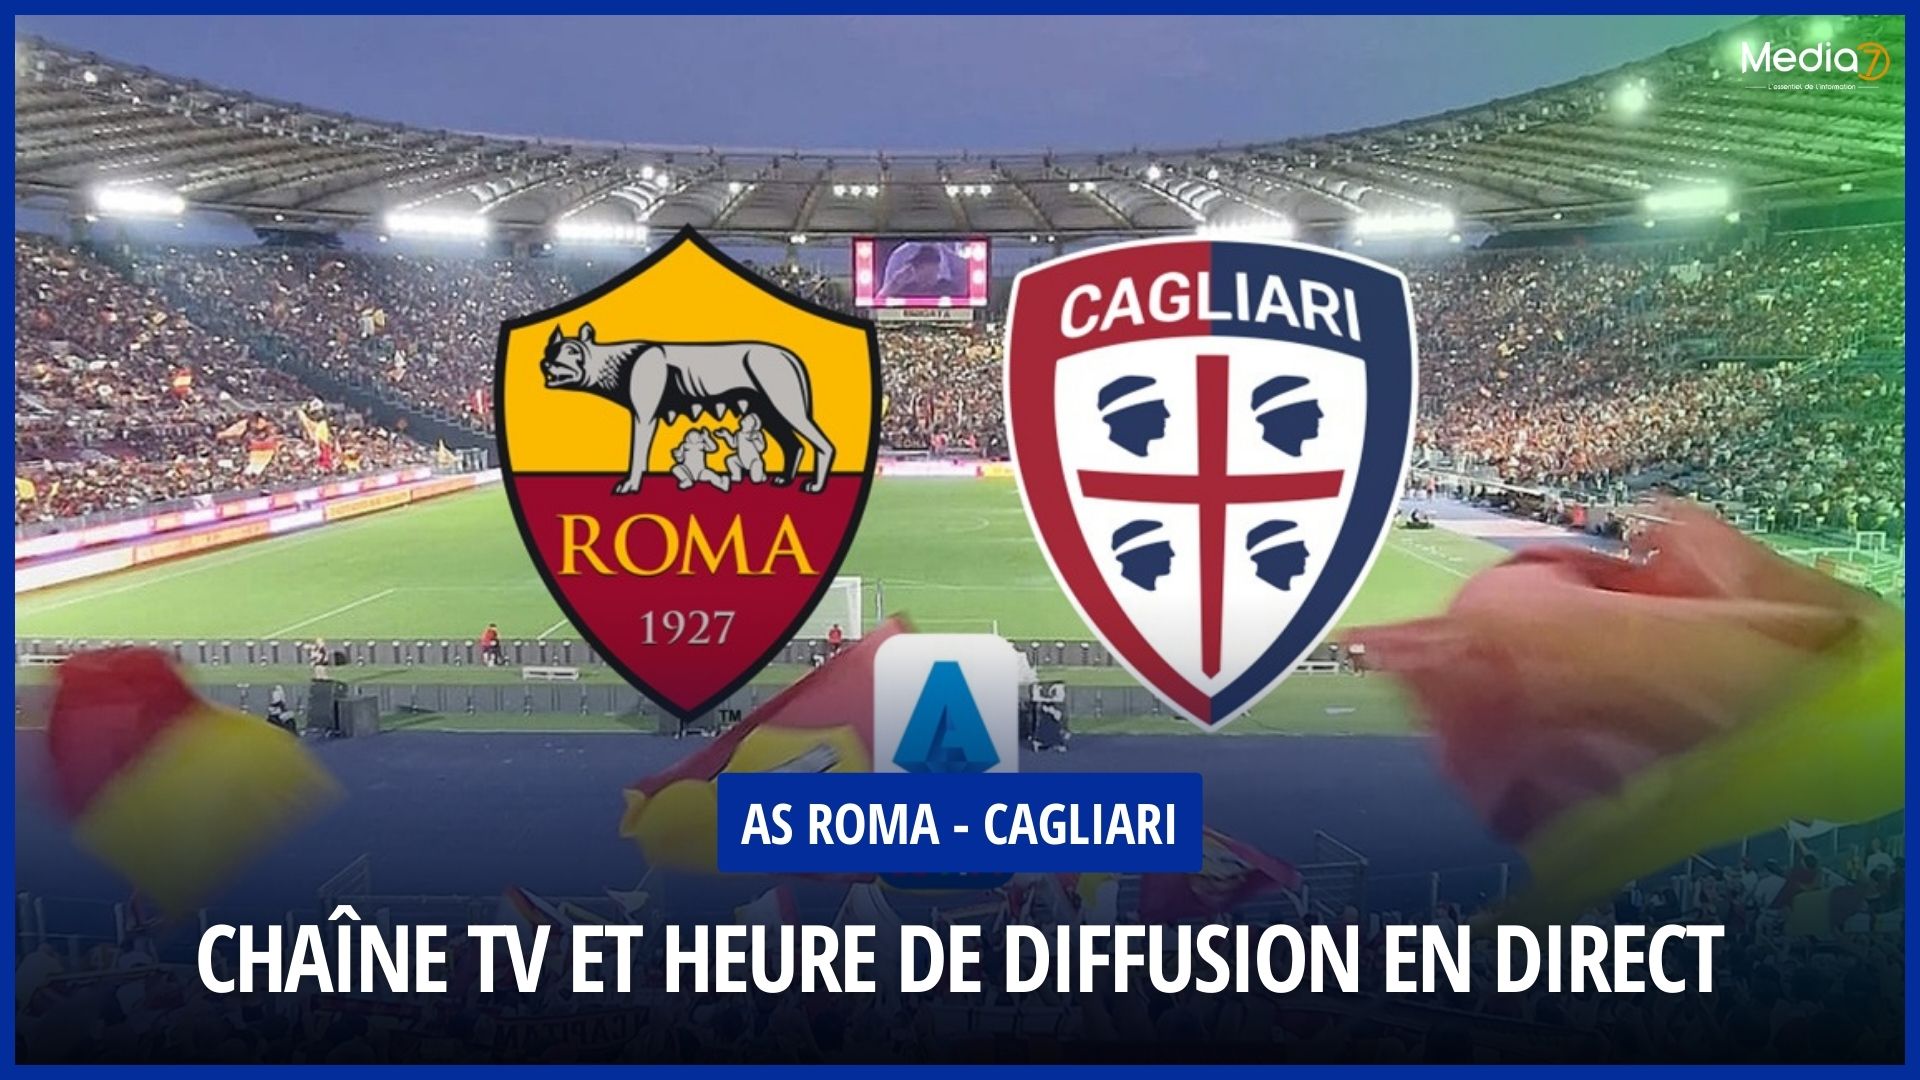 Live broadcast of the AS Roma - Cagliari Match: TV Program and Times - Media7